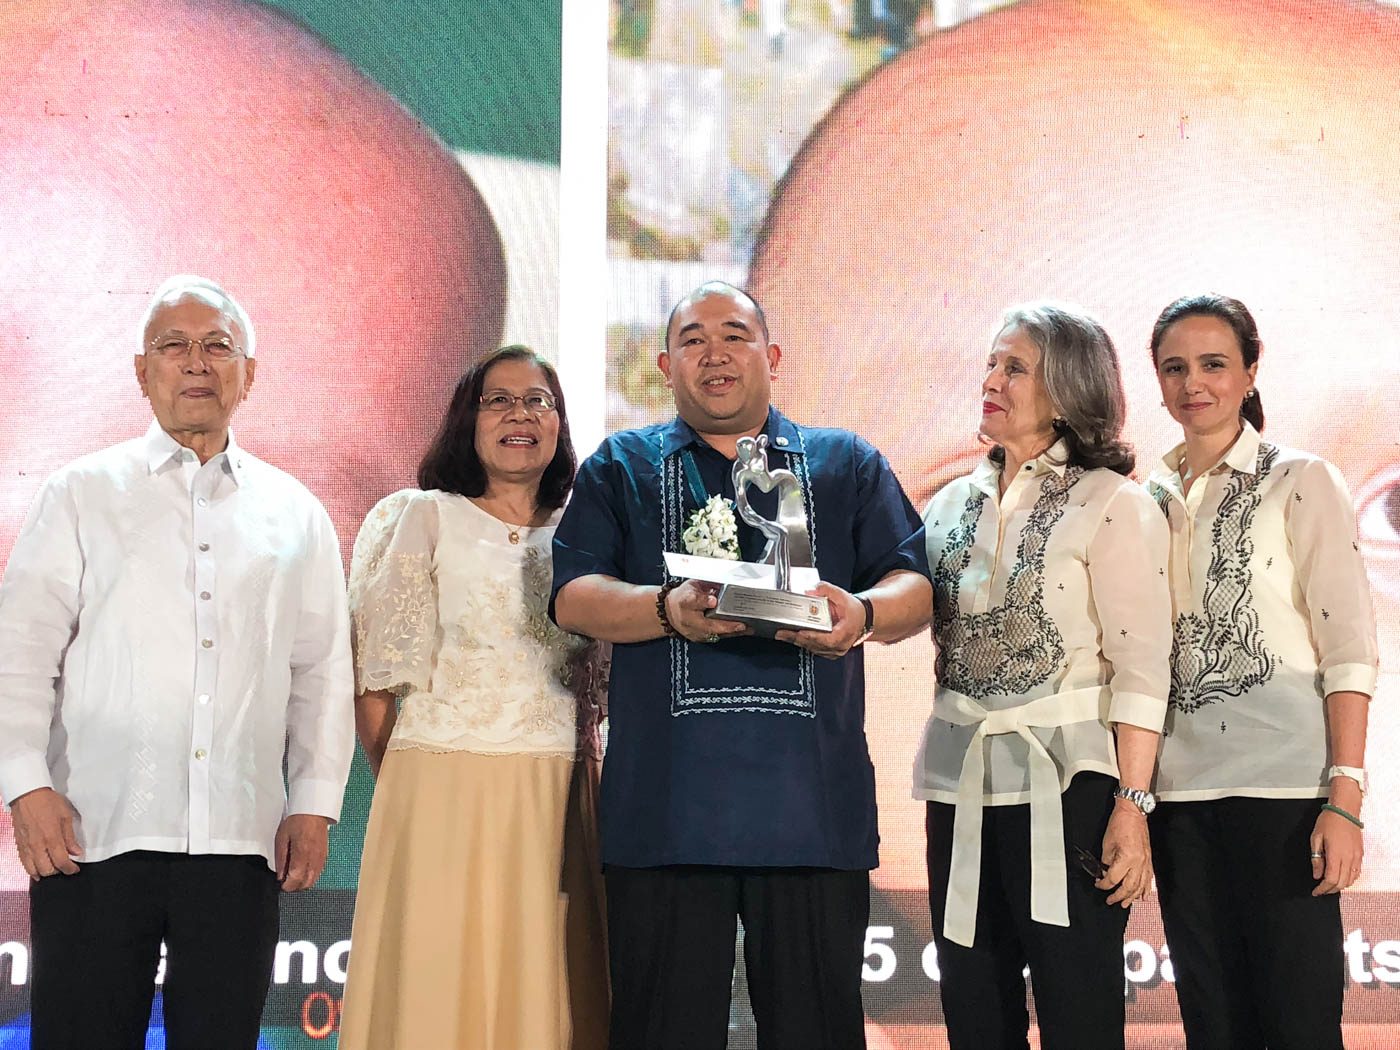 ALL SMILES. Valdez receives a plaque and a P500,000 cash prize for winning the Ramon Aboitiz Award for Exemplary Individual on August 31, 2018. Photo by Mara Cepeda/Rappler  